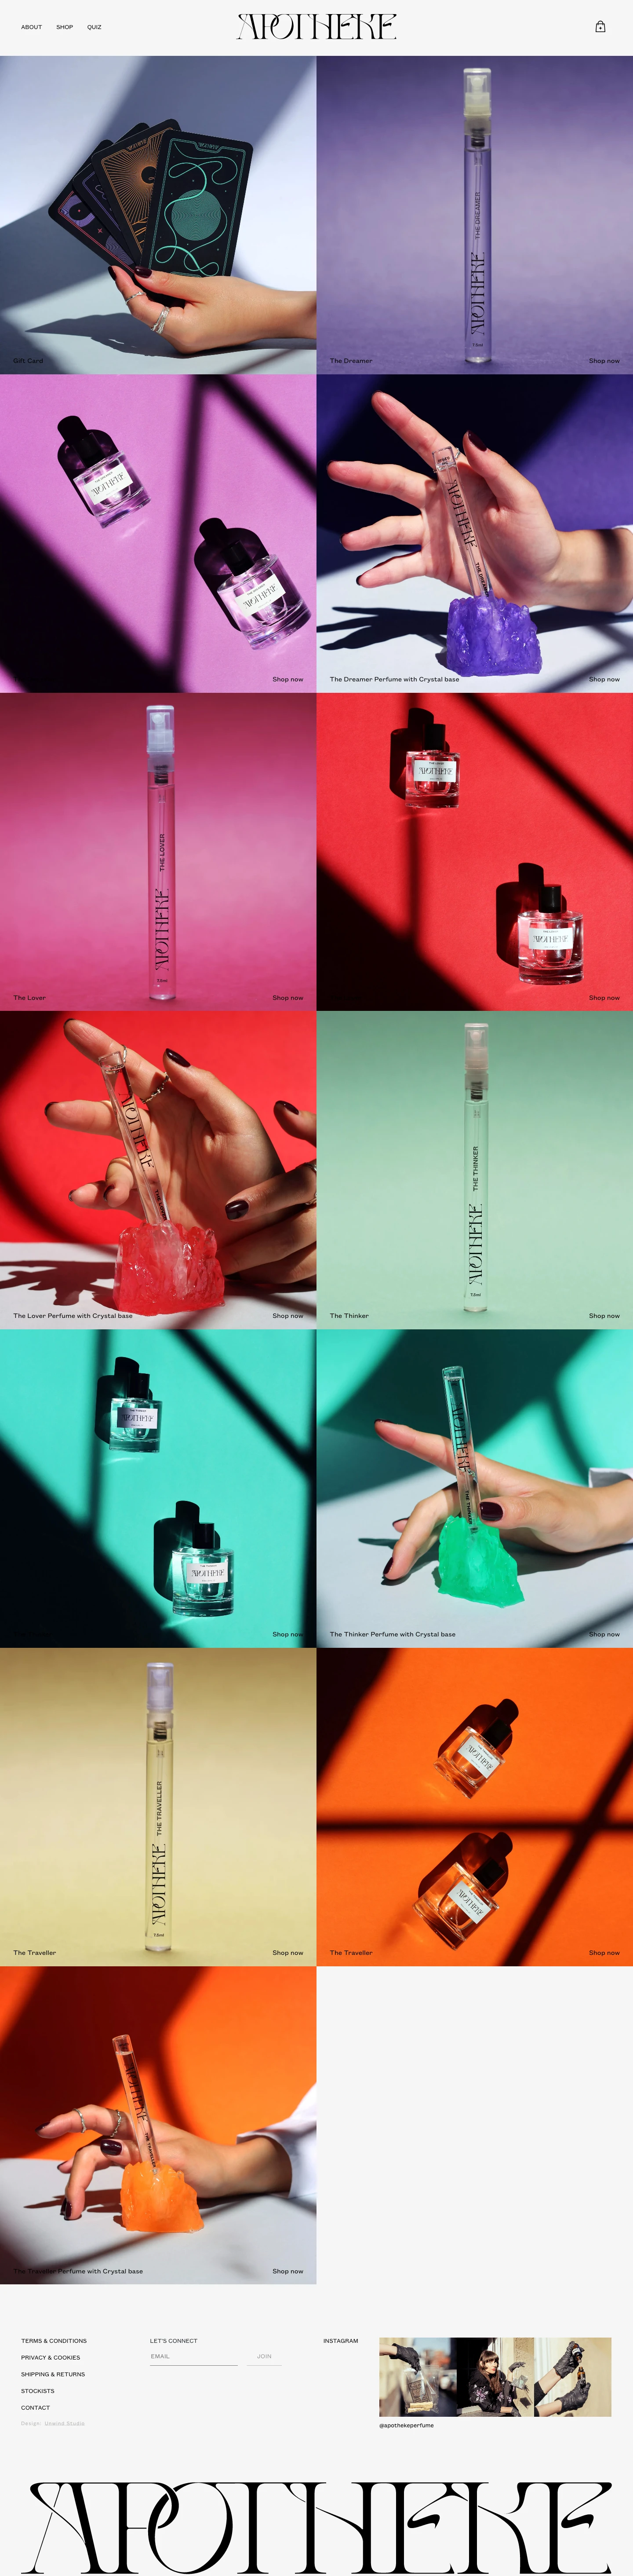 Apotheke Landing Page Example: Apotheke is a perfume brand with an emotional and psychological approach to scent.